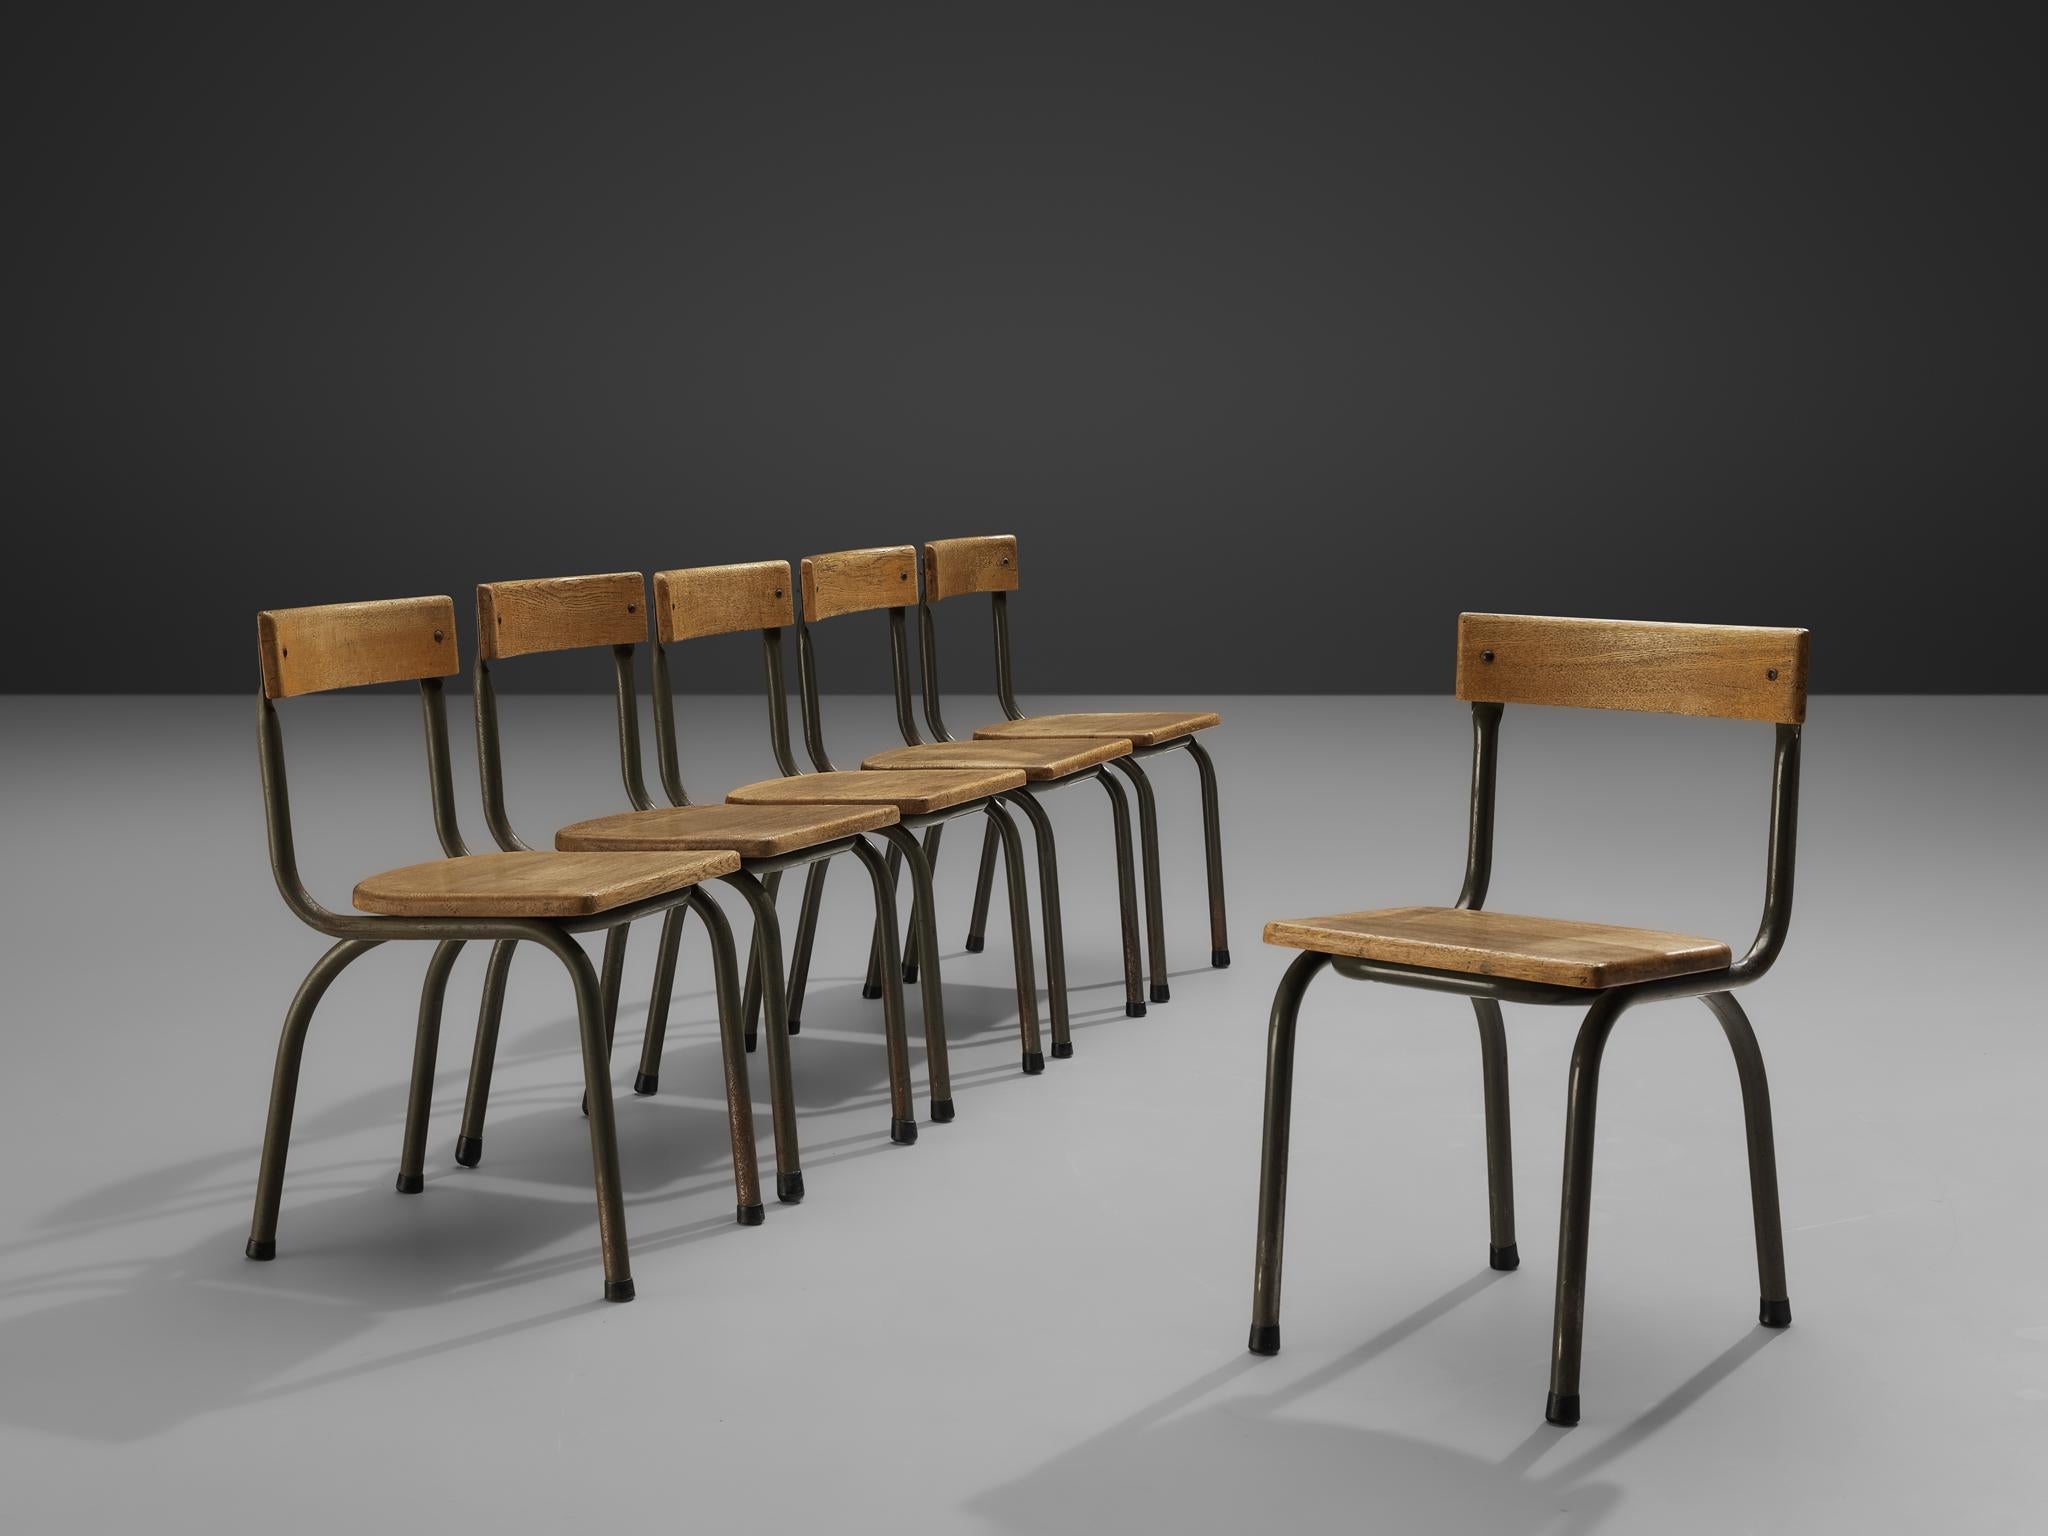 Willy Van Der Meeren for Tubax, set of six chairs, metal, oak, Belgium, 1957.

This set of industrial chairs is designed by the Belgian designer Willy Van Der Meeren. These sober yet interesting and moody set of chairs features a seat- and backrest